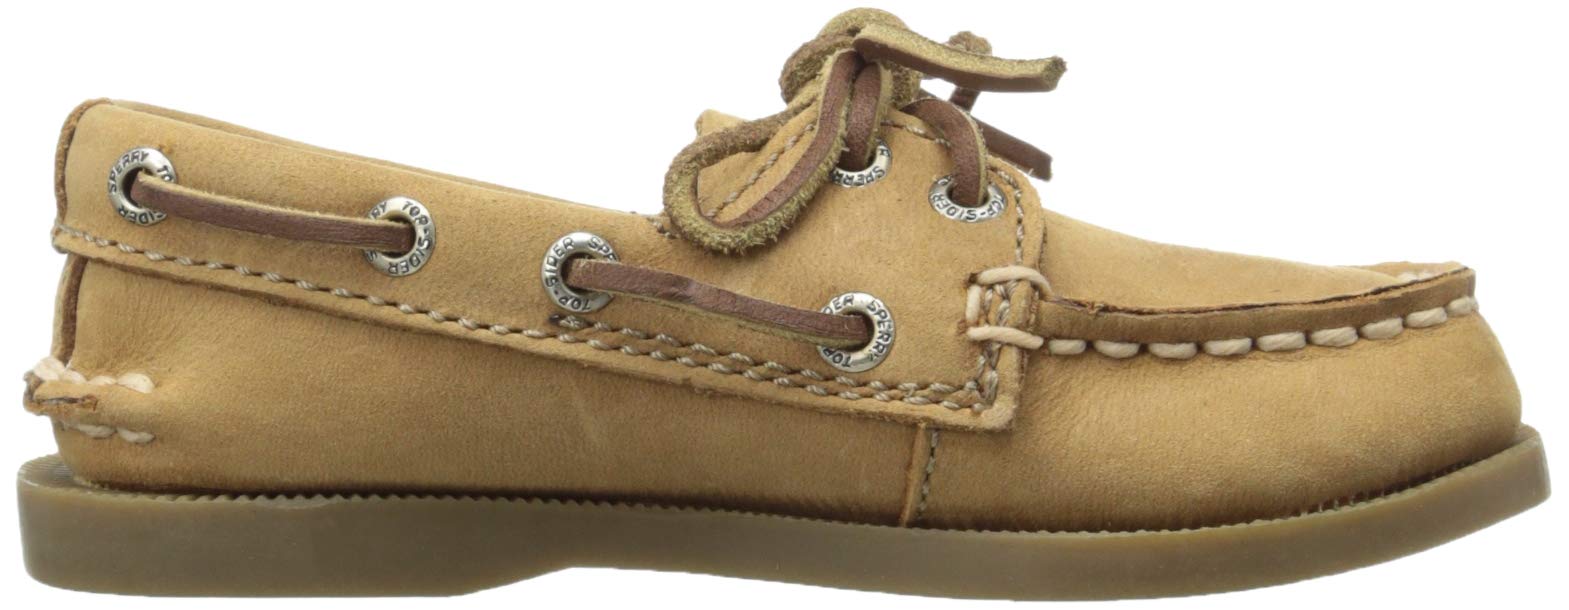 Sperry Kid's^Kid's Authentic Original Boat Shoe, 7 Youth